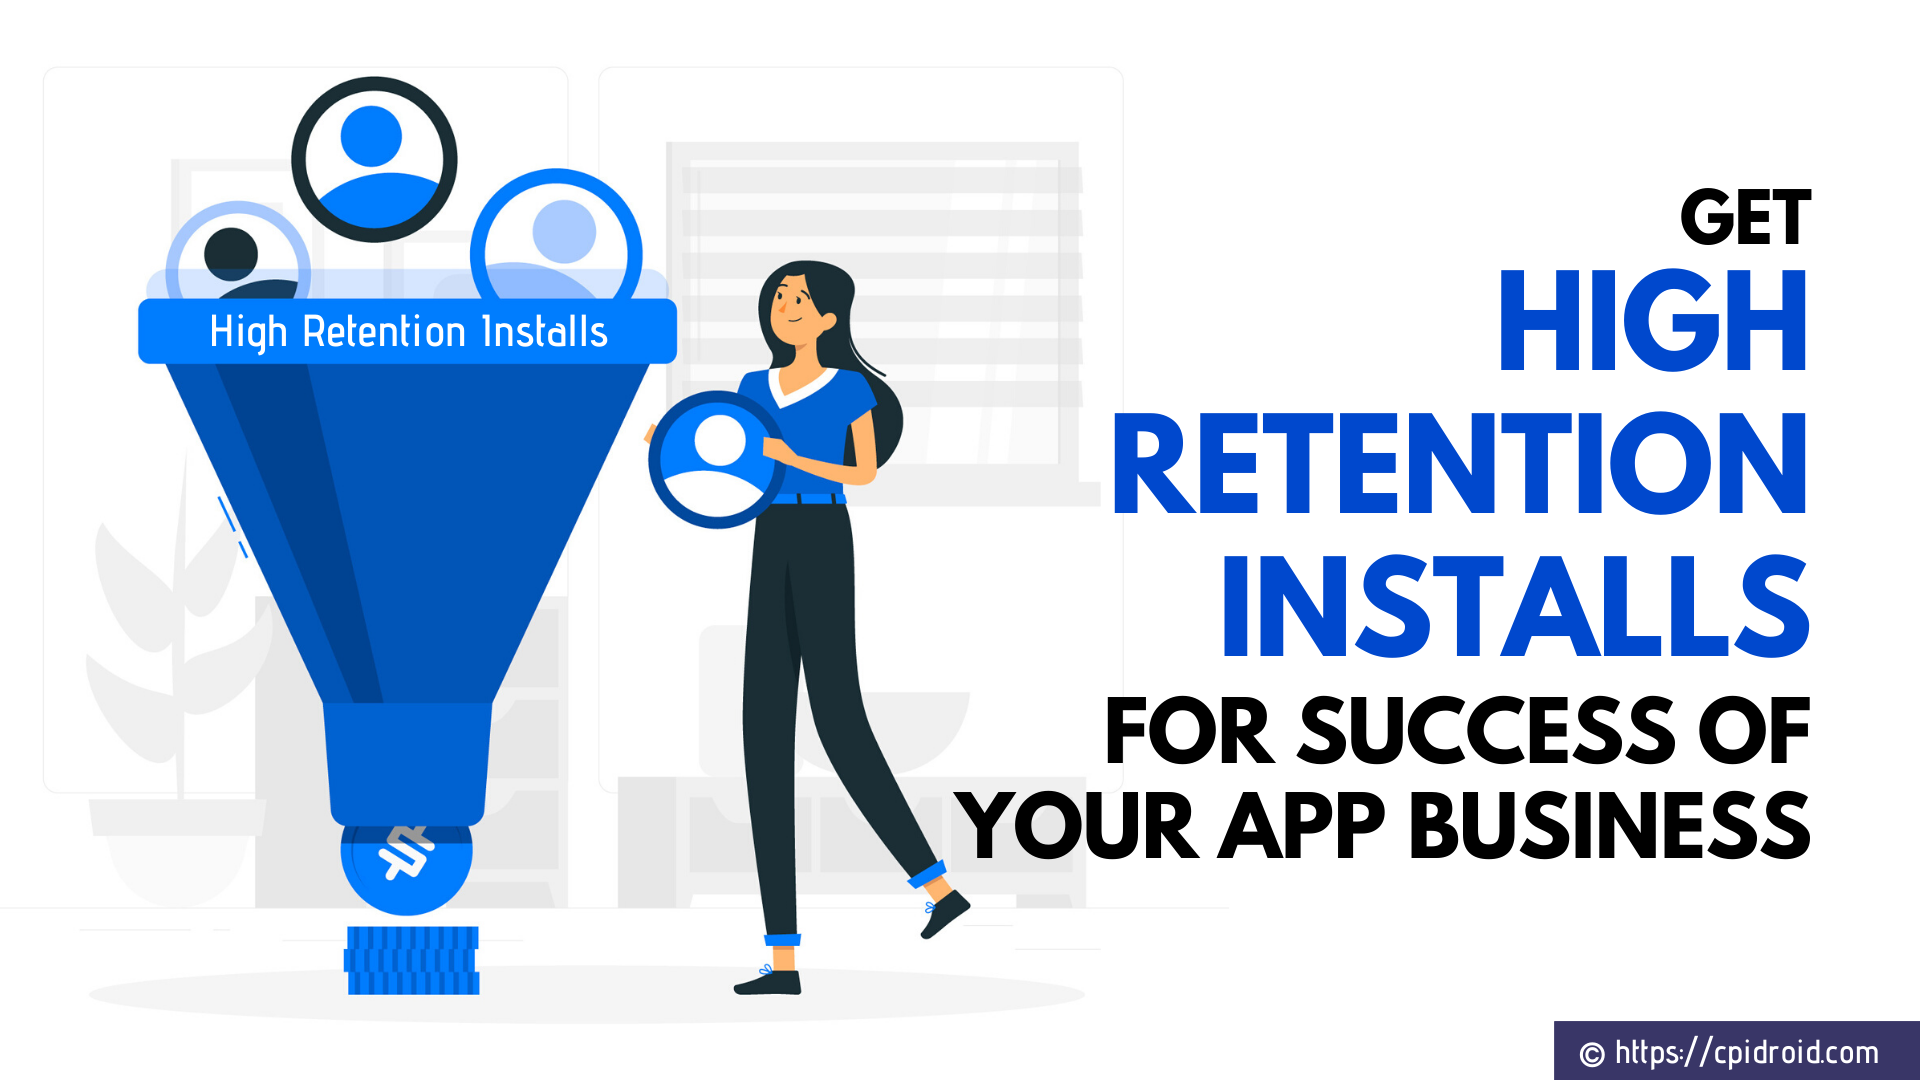 Market it Smart - Buy High Retention Installs for Success of your App Business